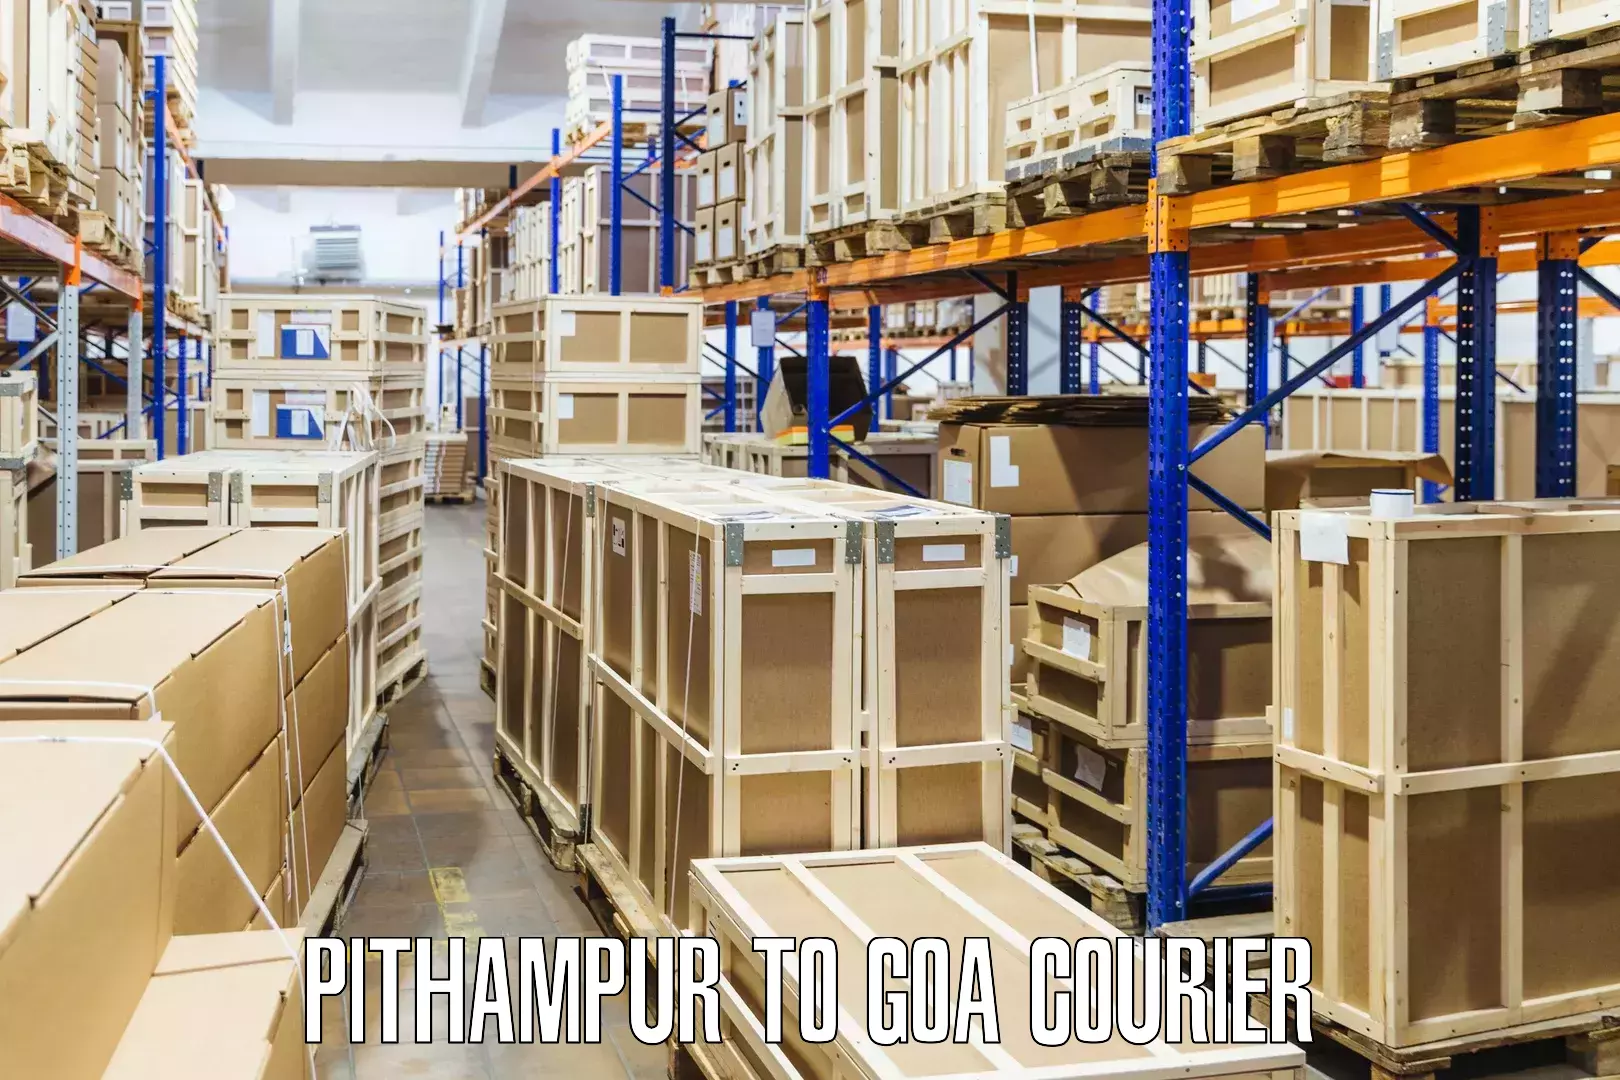 Versatile courier offerings Pithampur to Goa